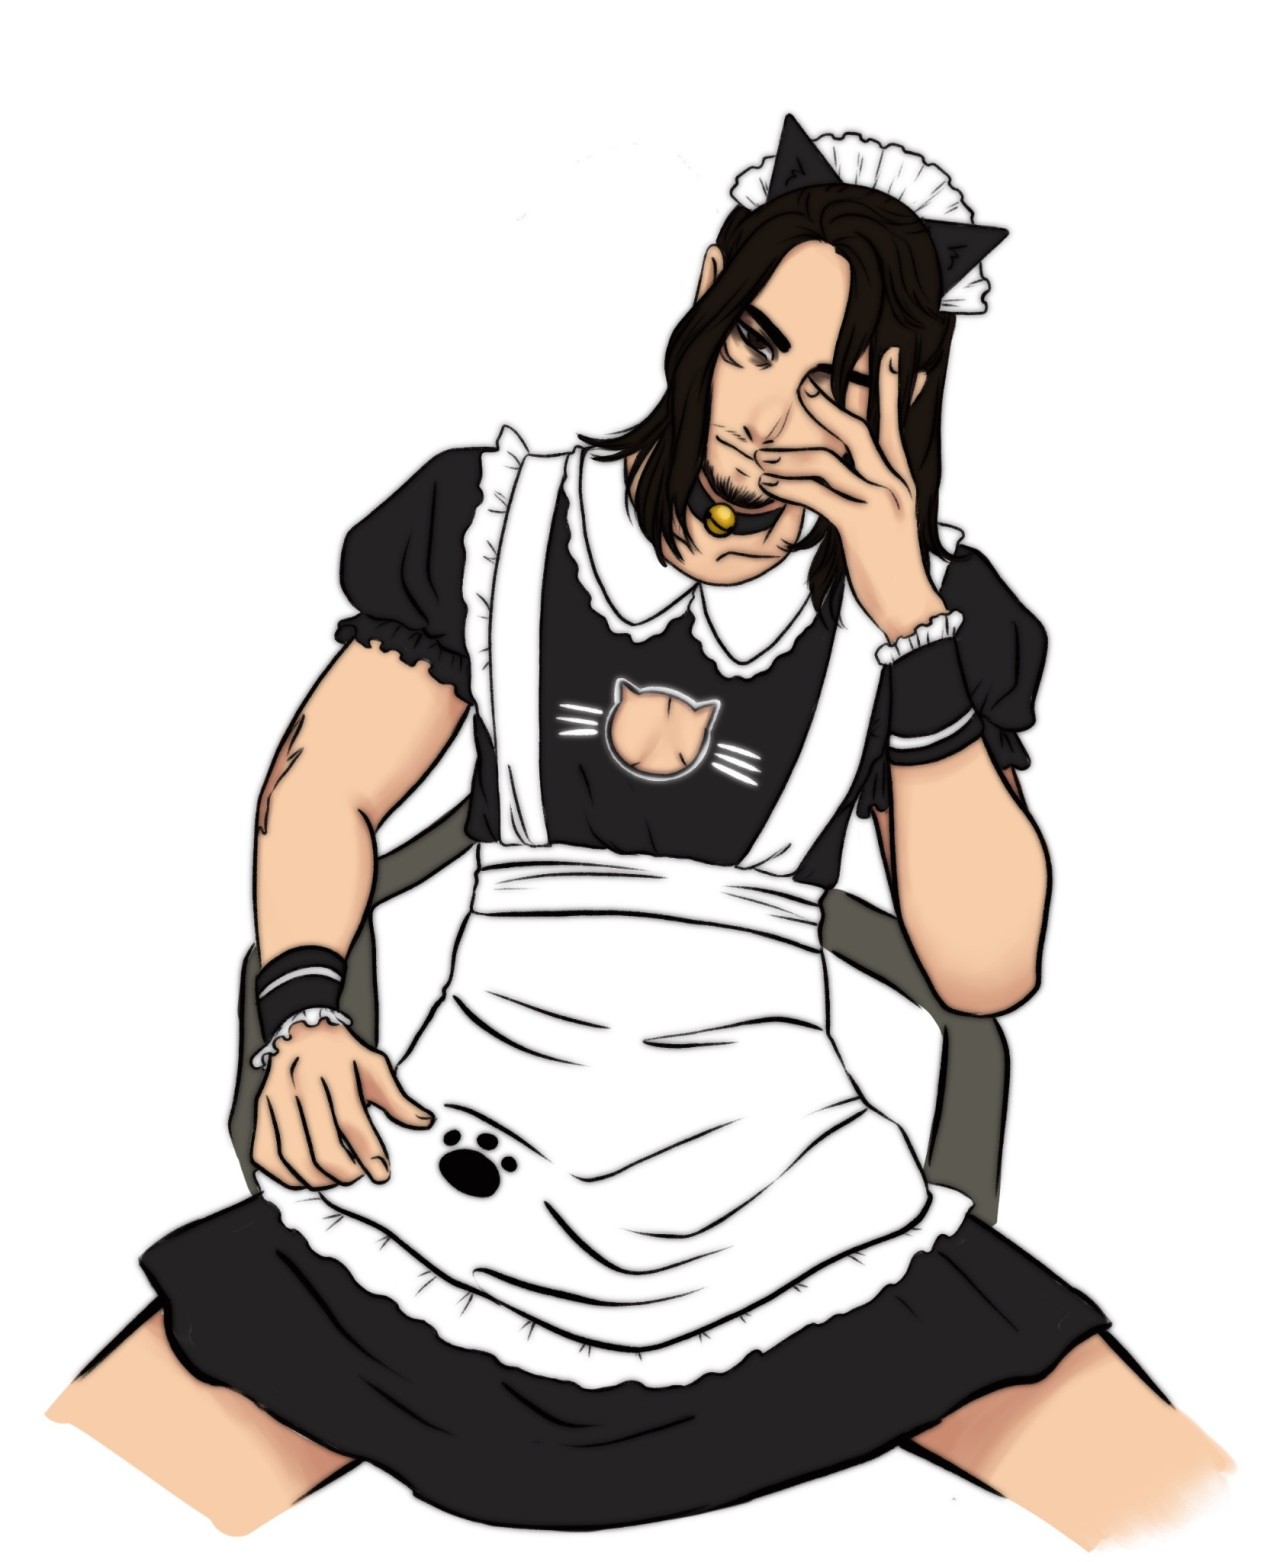 Aizawa in a maid outfit. That's it